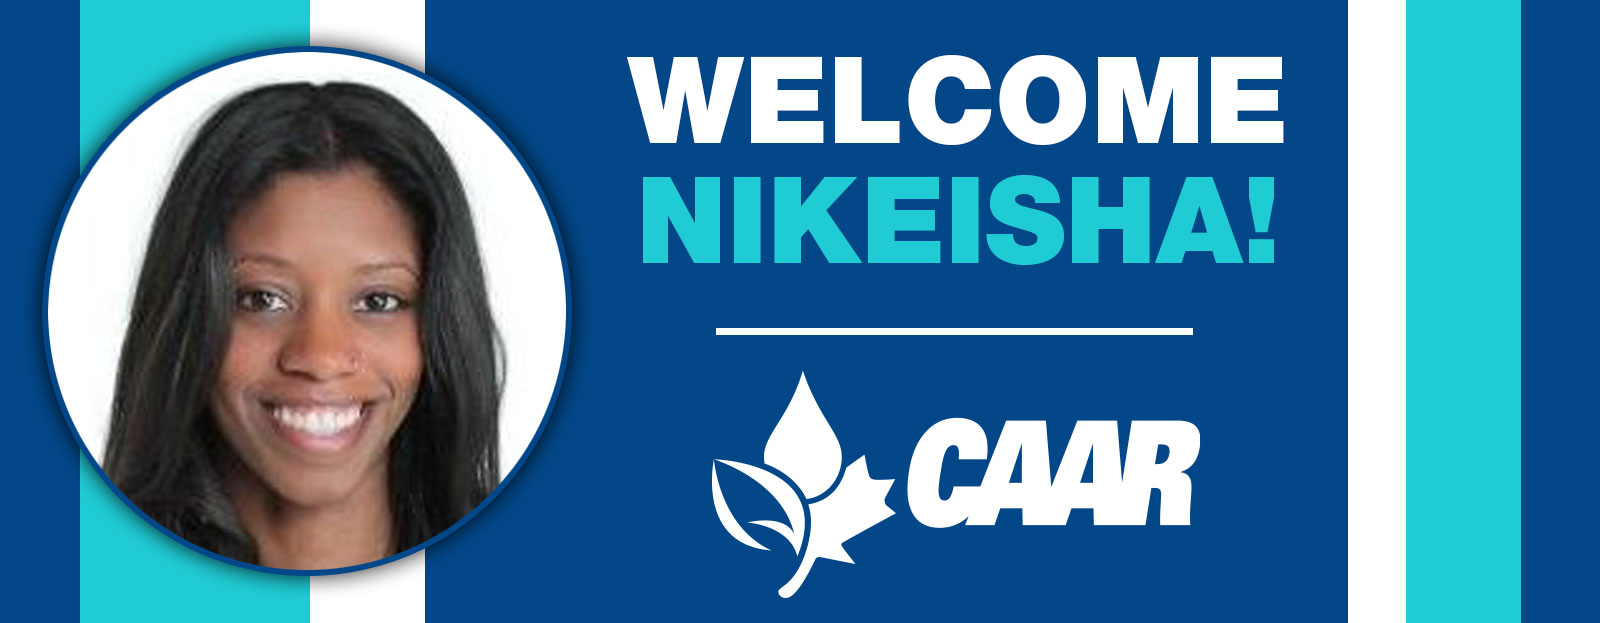 Banner of CAAR welcomes Nikeisha to the team!